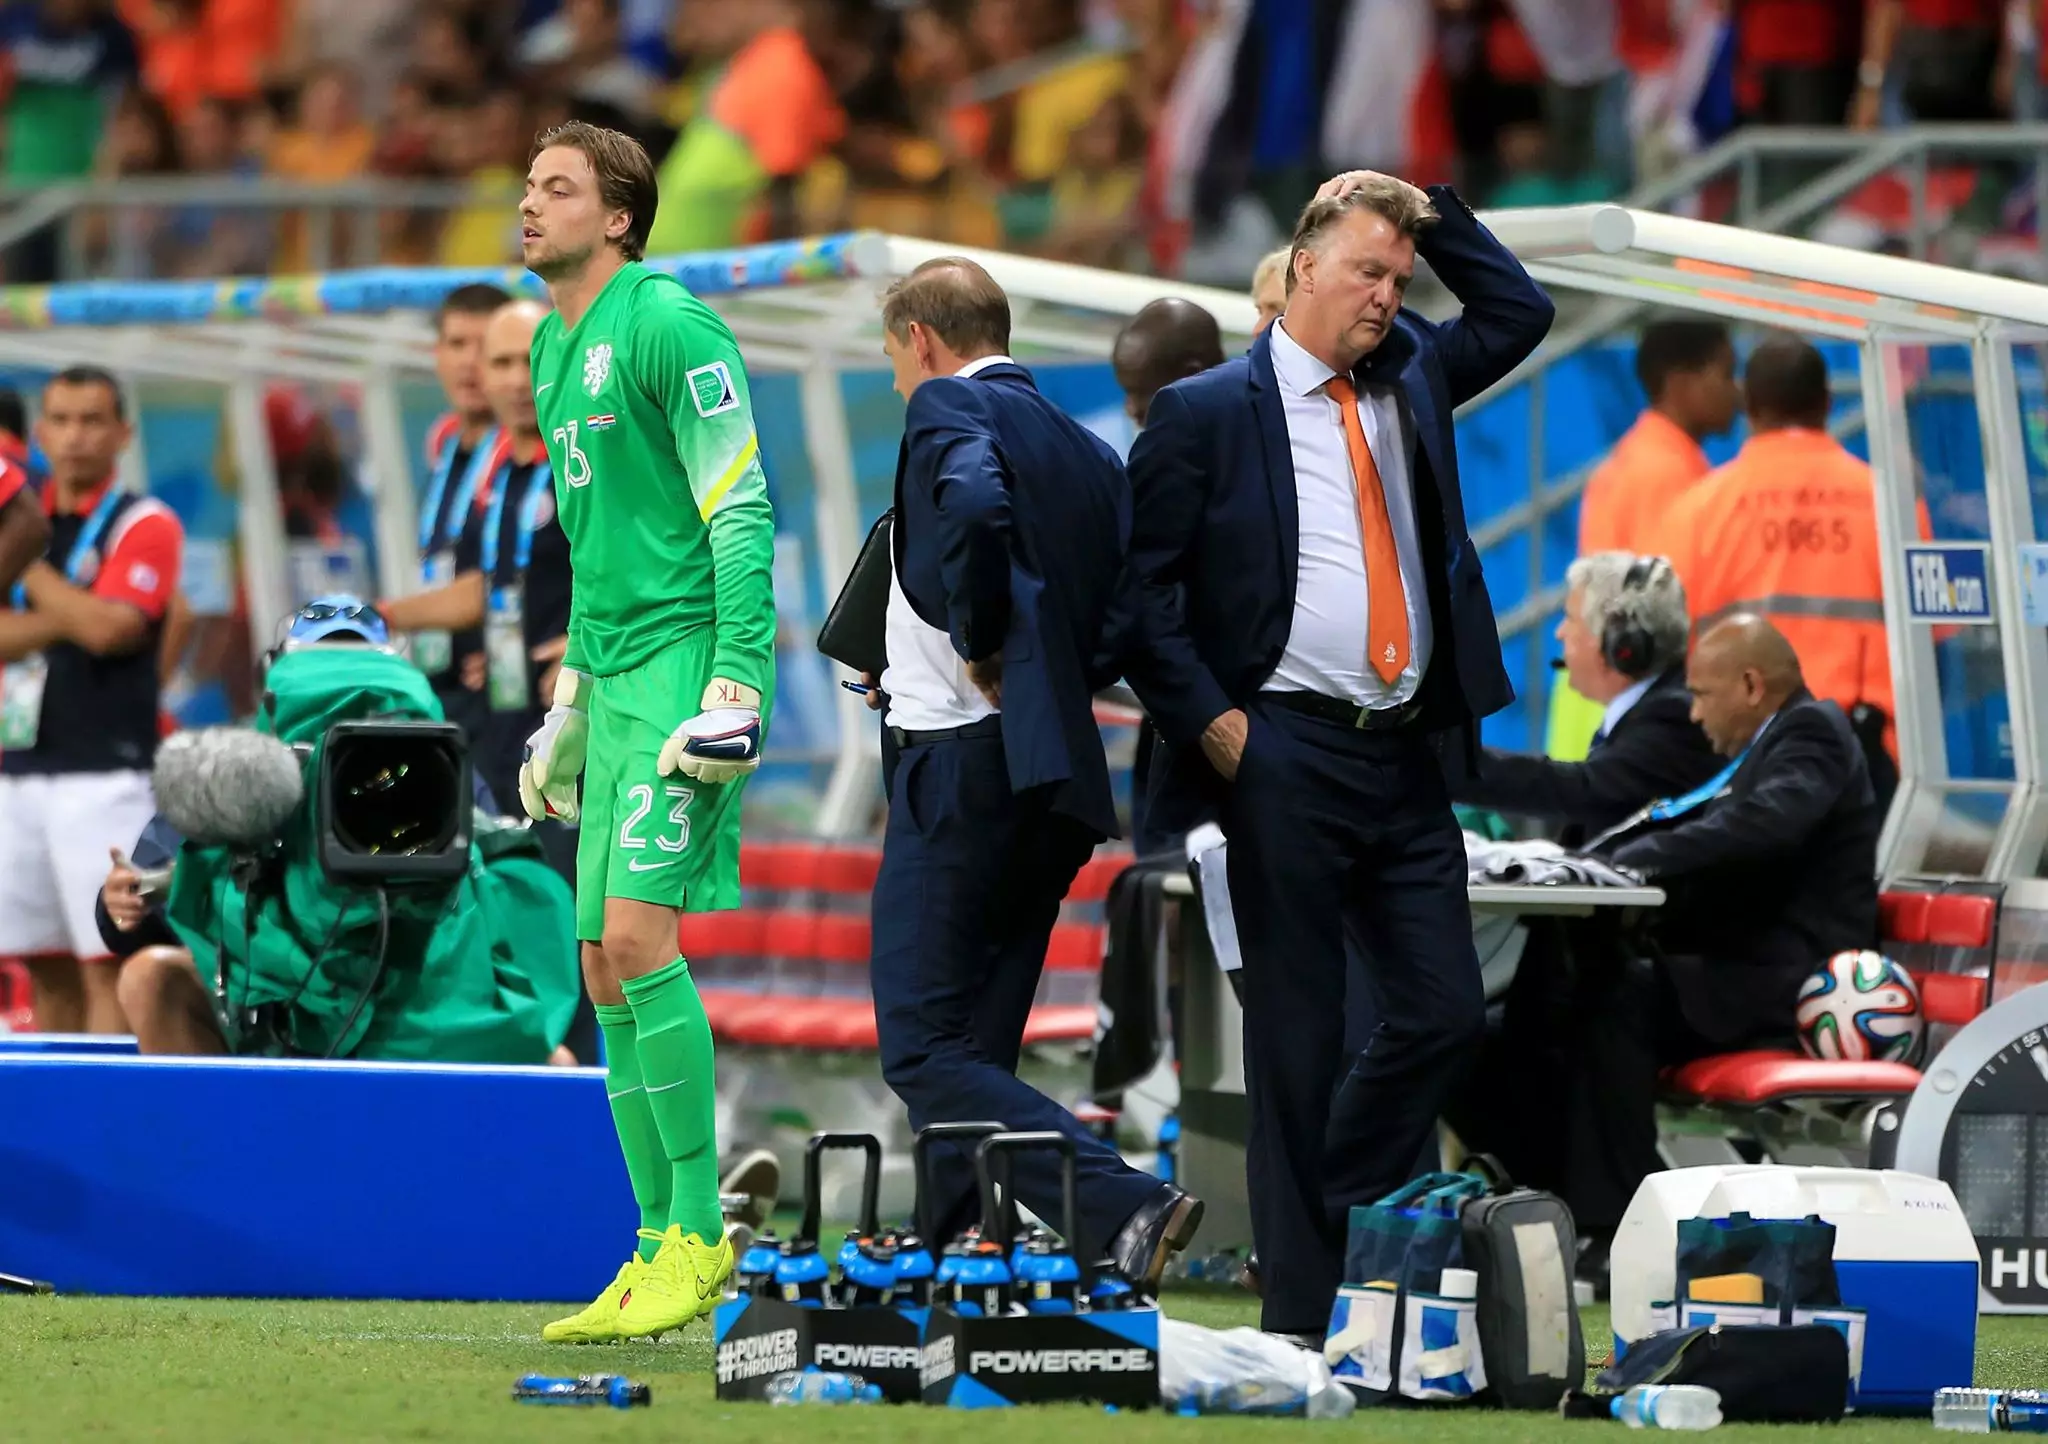 Krul comes on just before the shoot-out. Image: PA